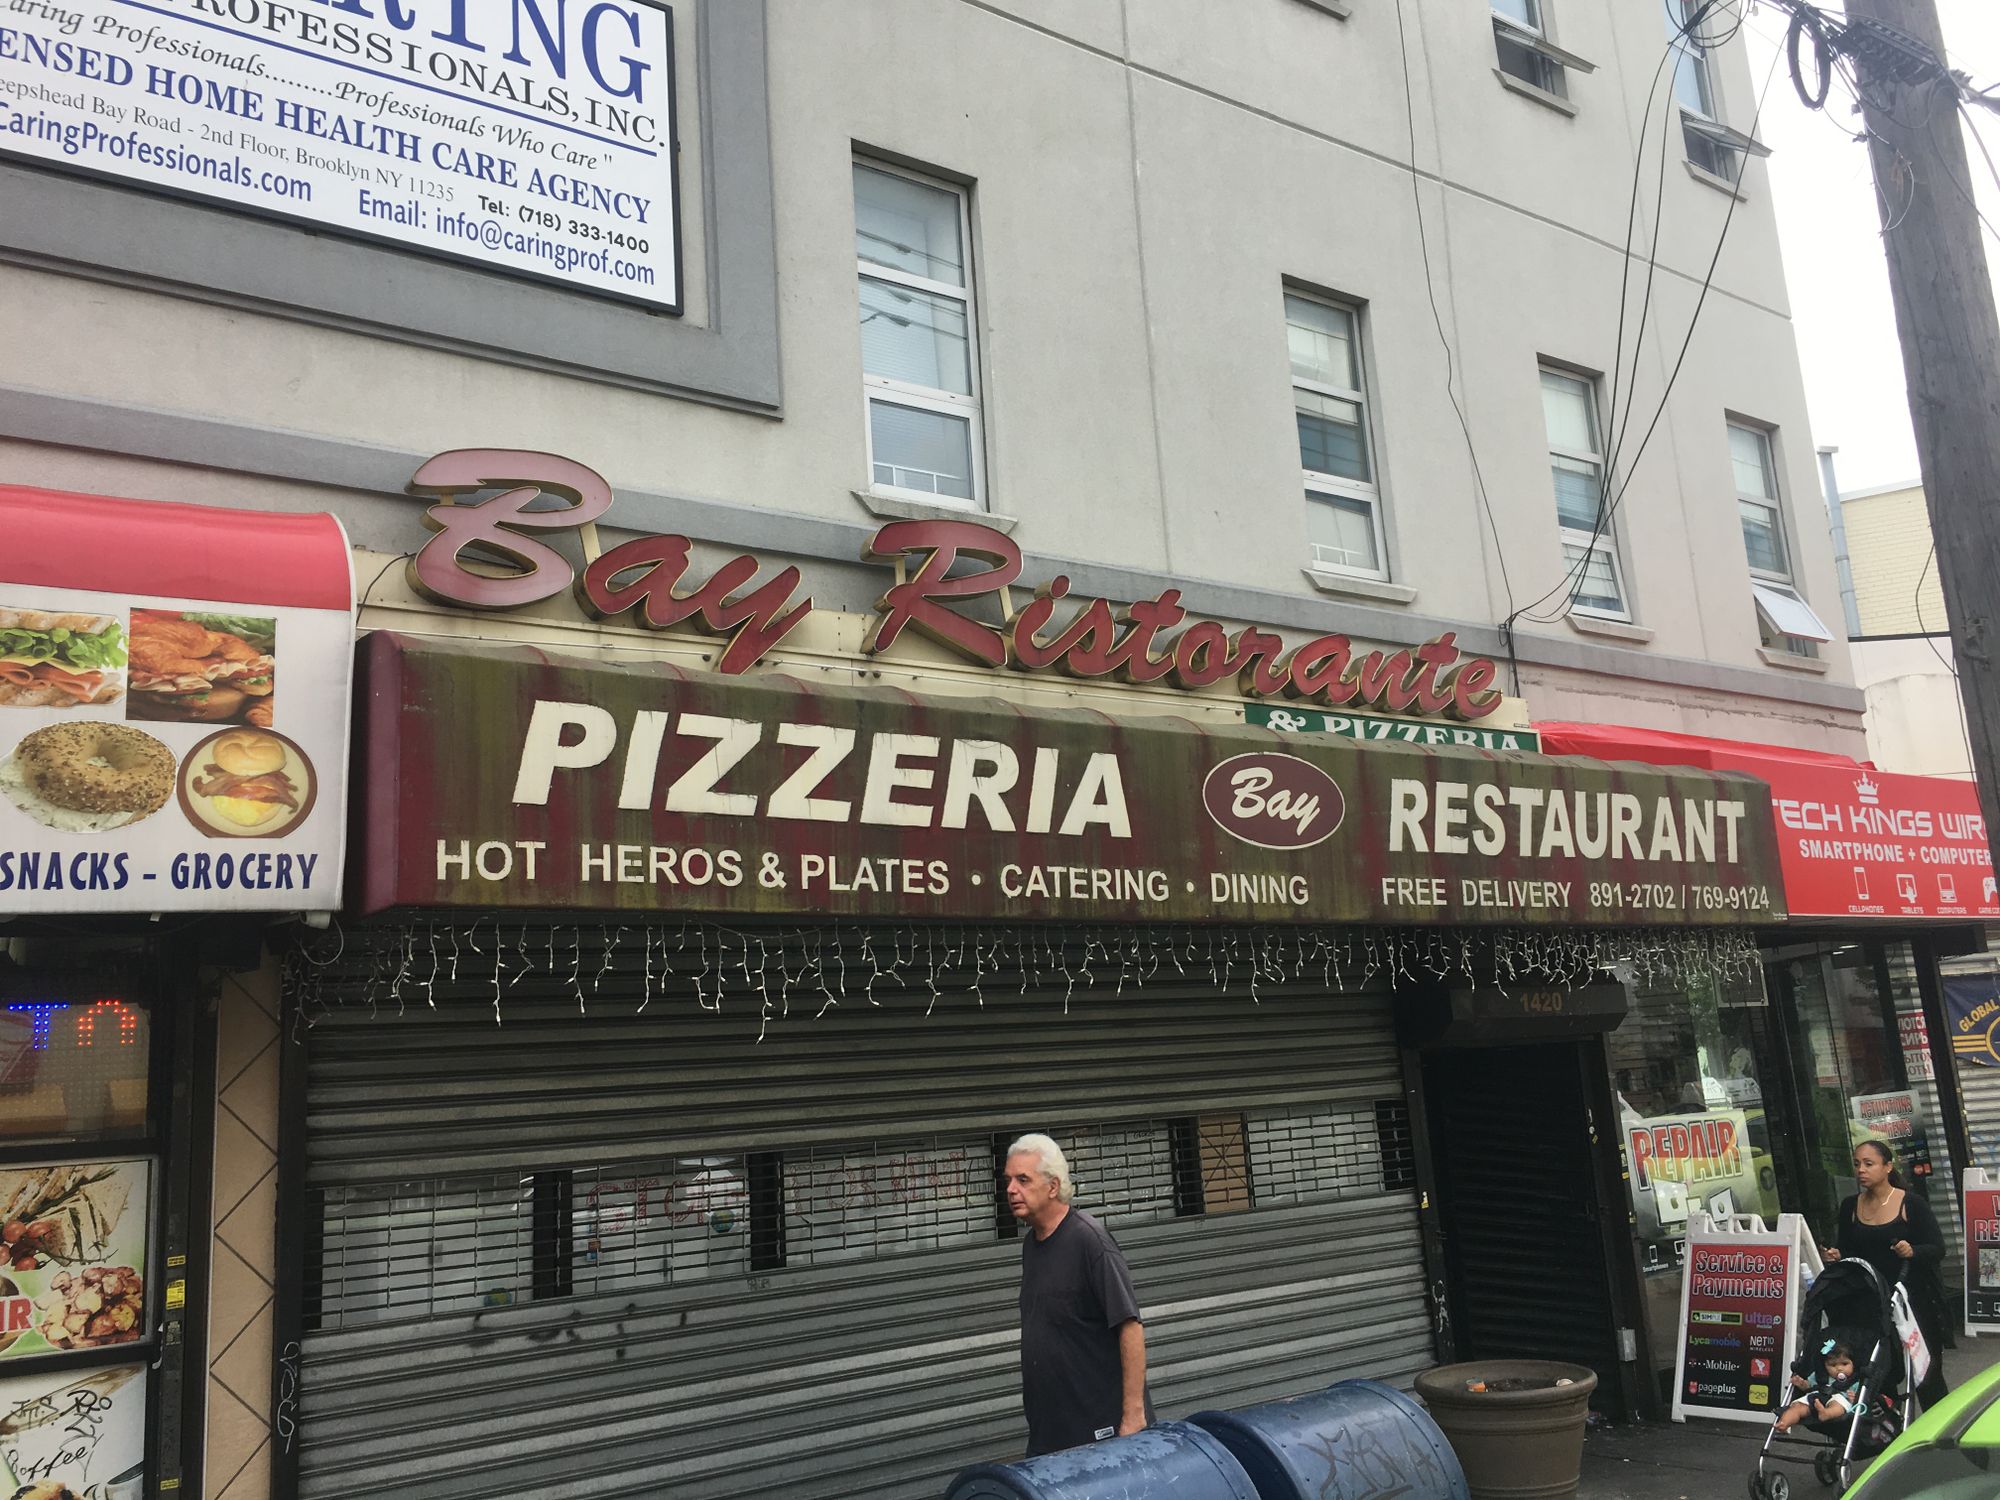 Bay Pizzeria Is Closed Down, Space Is Up For Rent